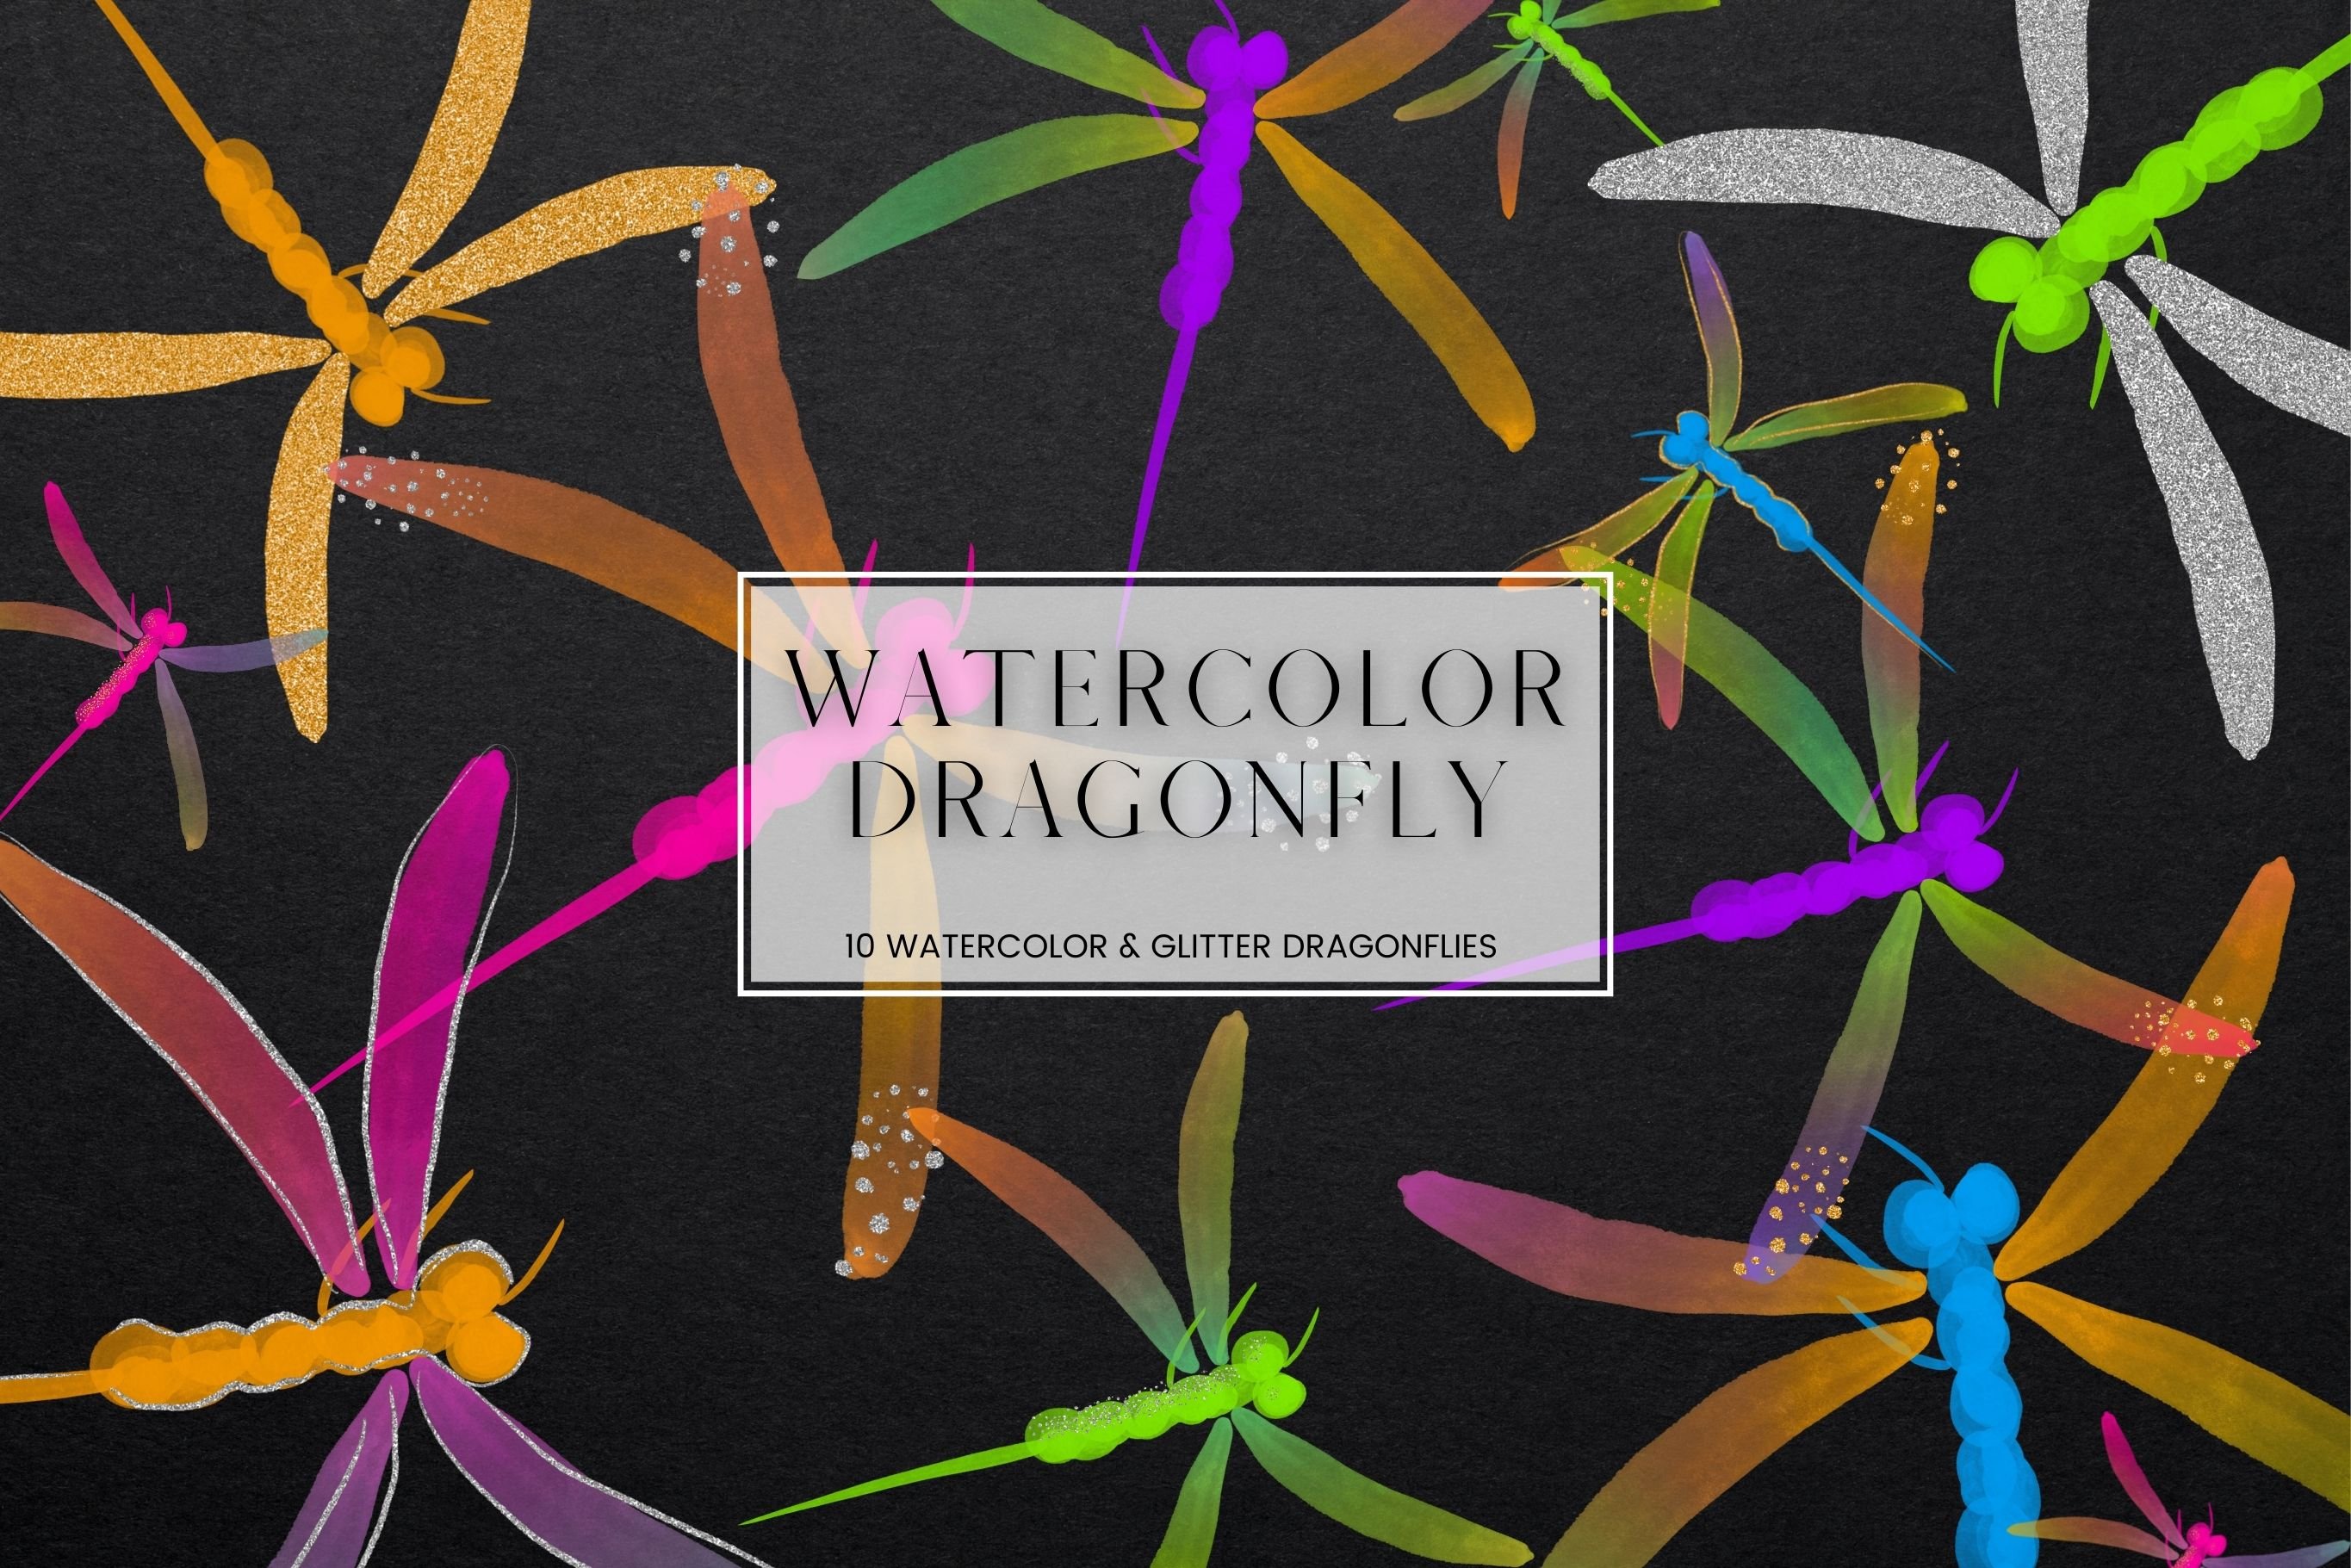 Watercolour Dragonfly Clip Art cover image.